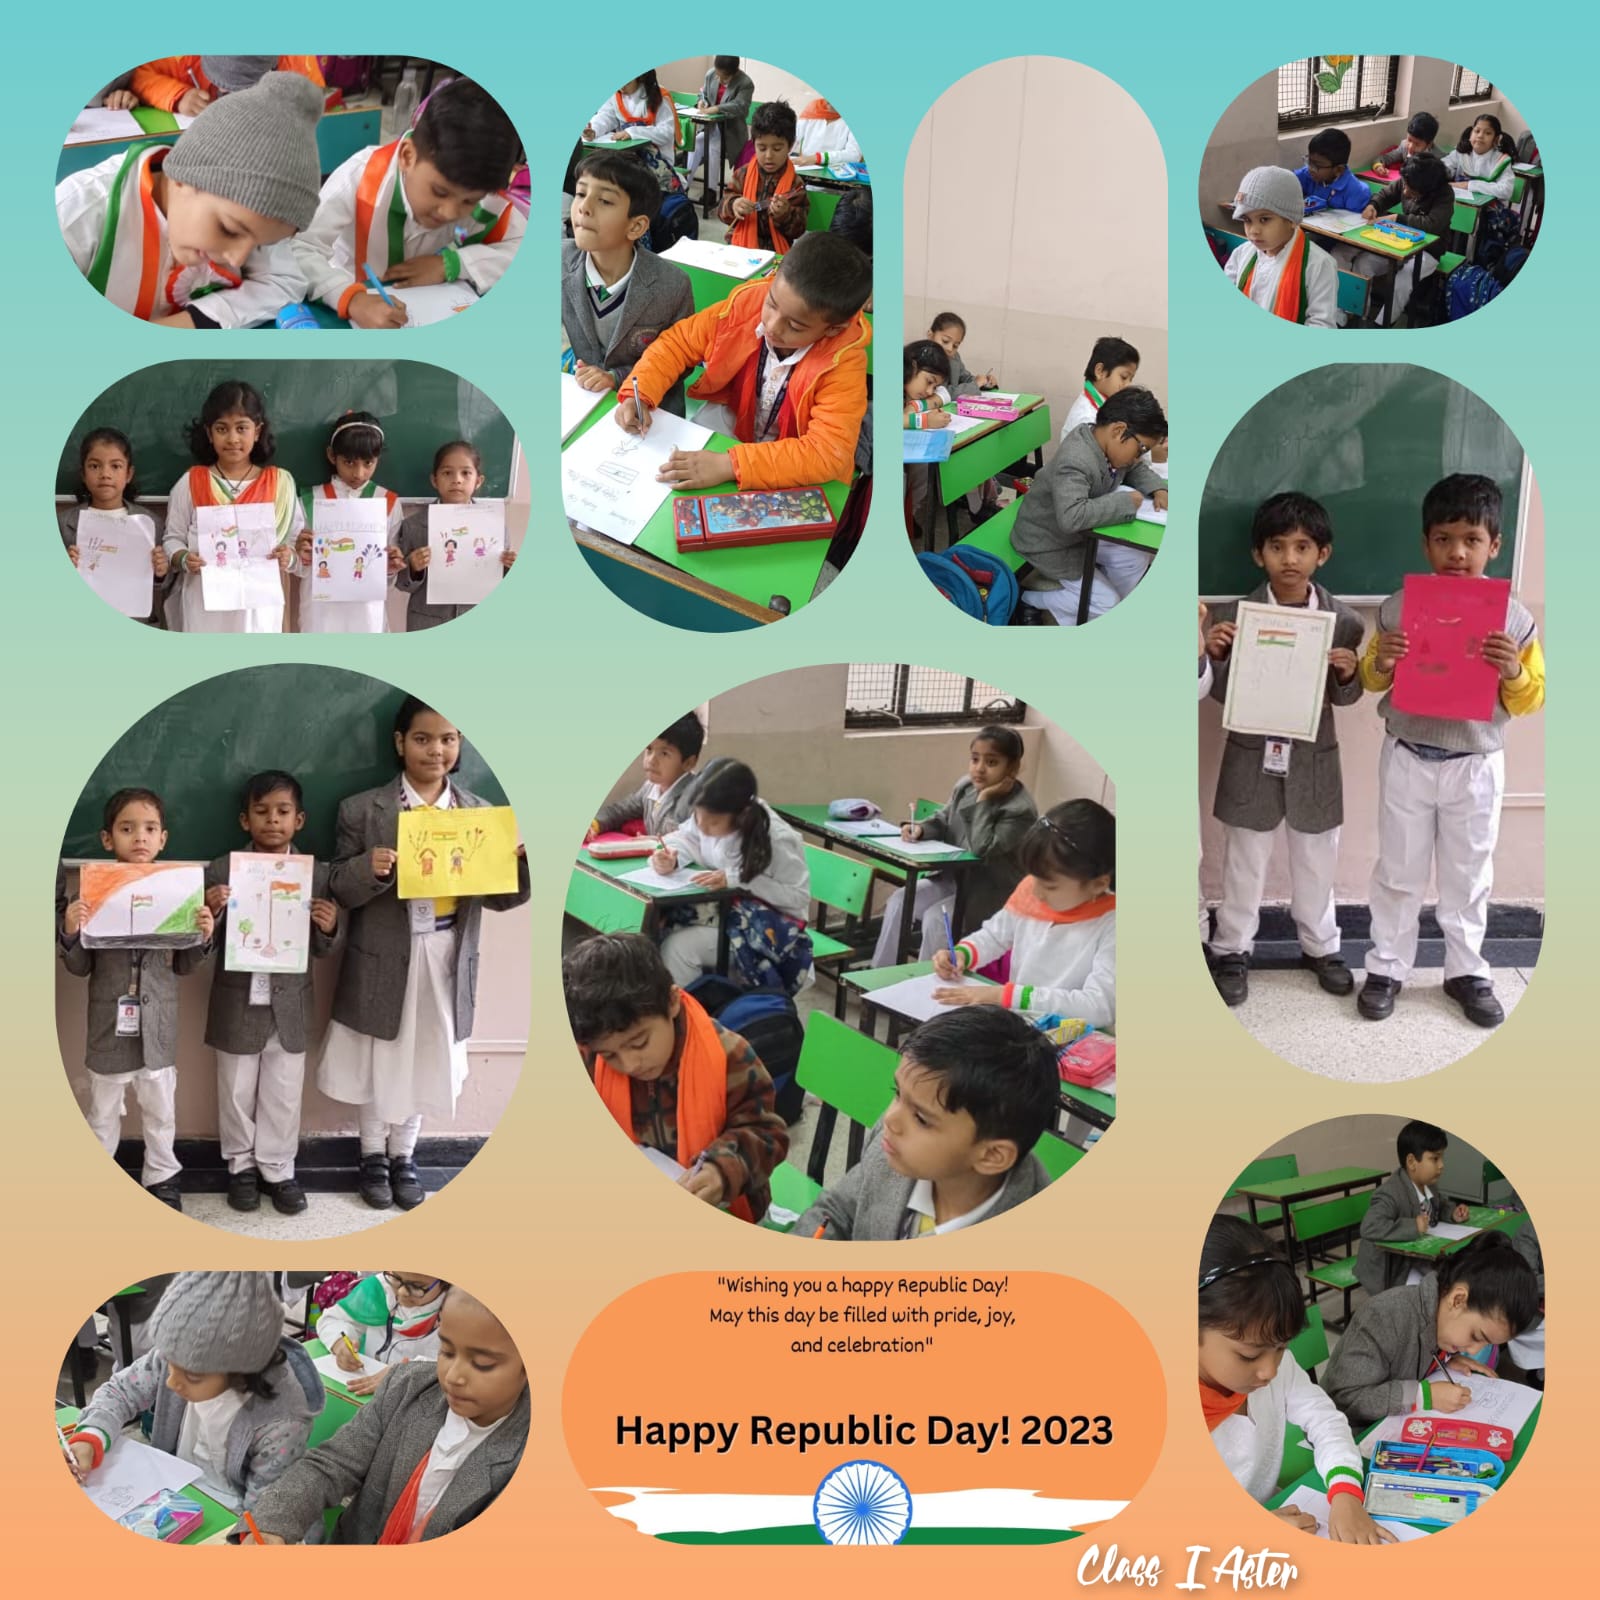 REPUBLIC DAY POSTER MAKING ACTIVITY